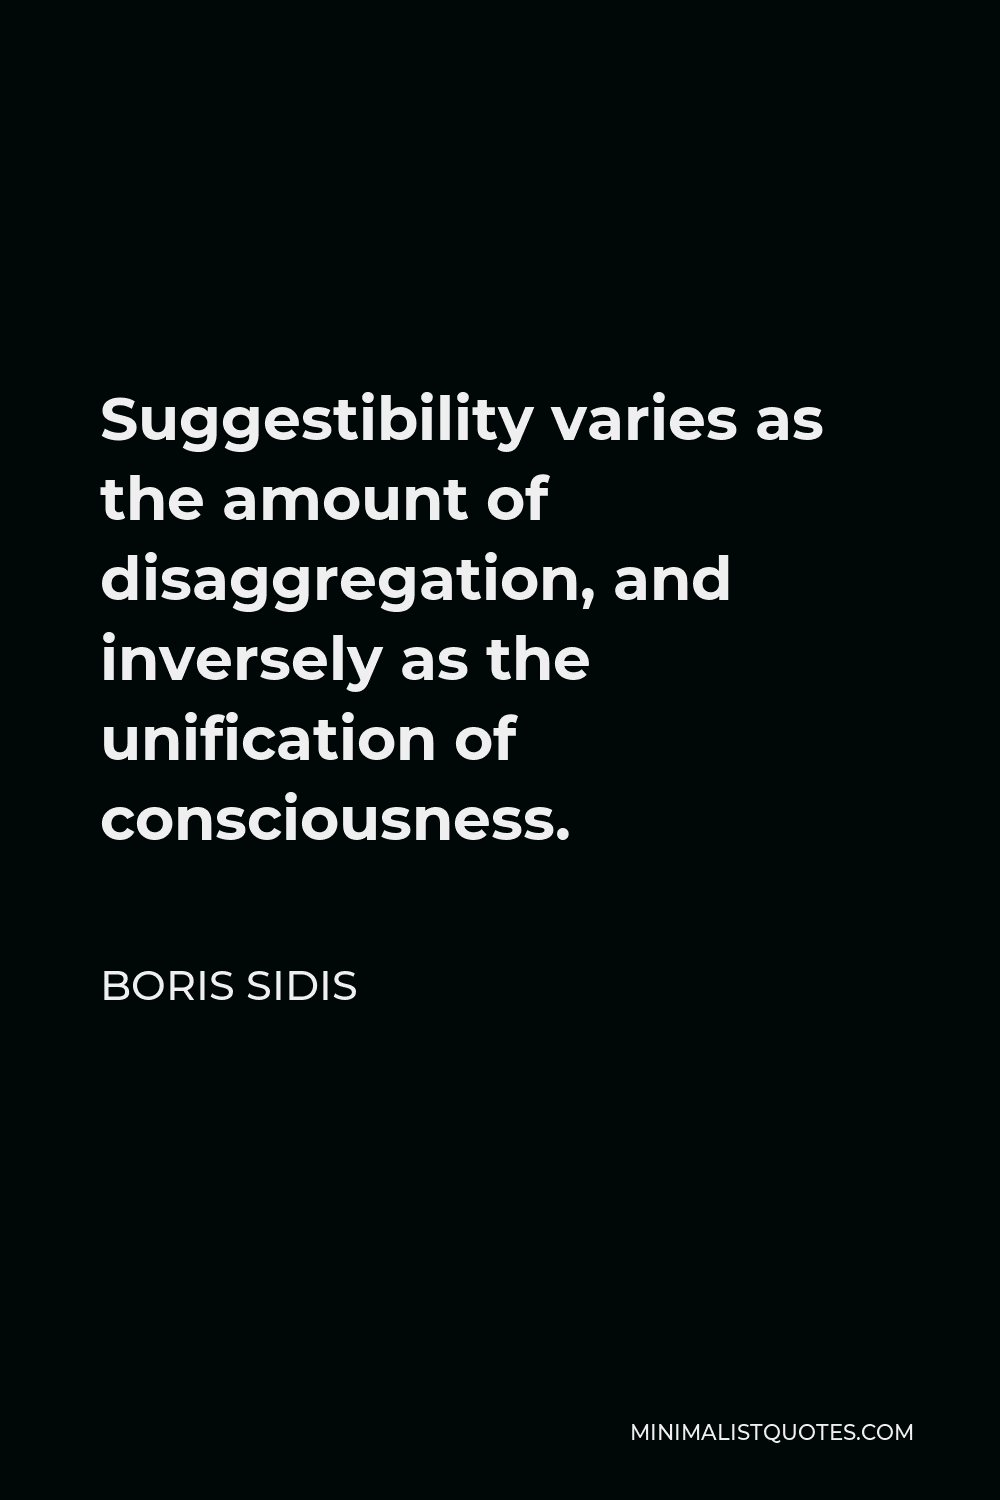 Boris Sidis Quote - Suggestibility varies as the amount of disaggregation, and inversely as the unification of consciousness.